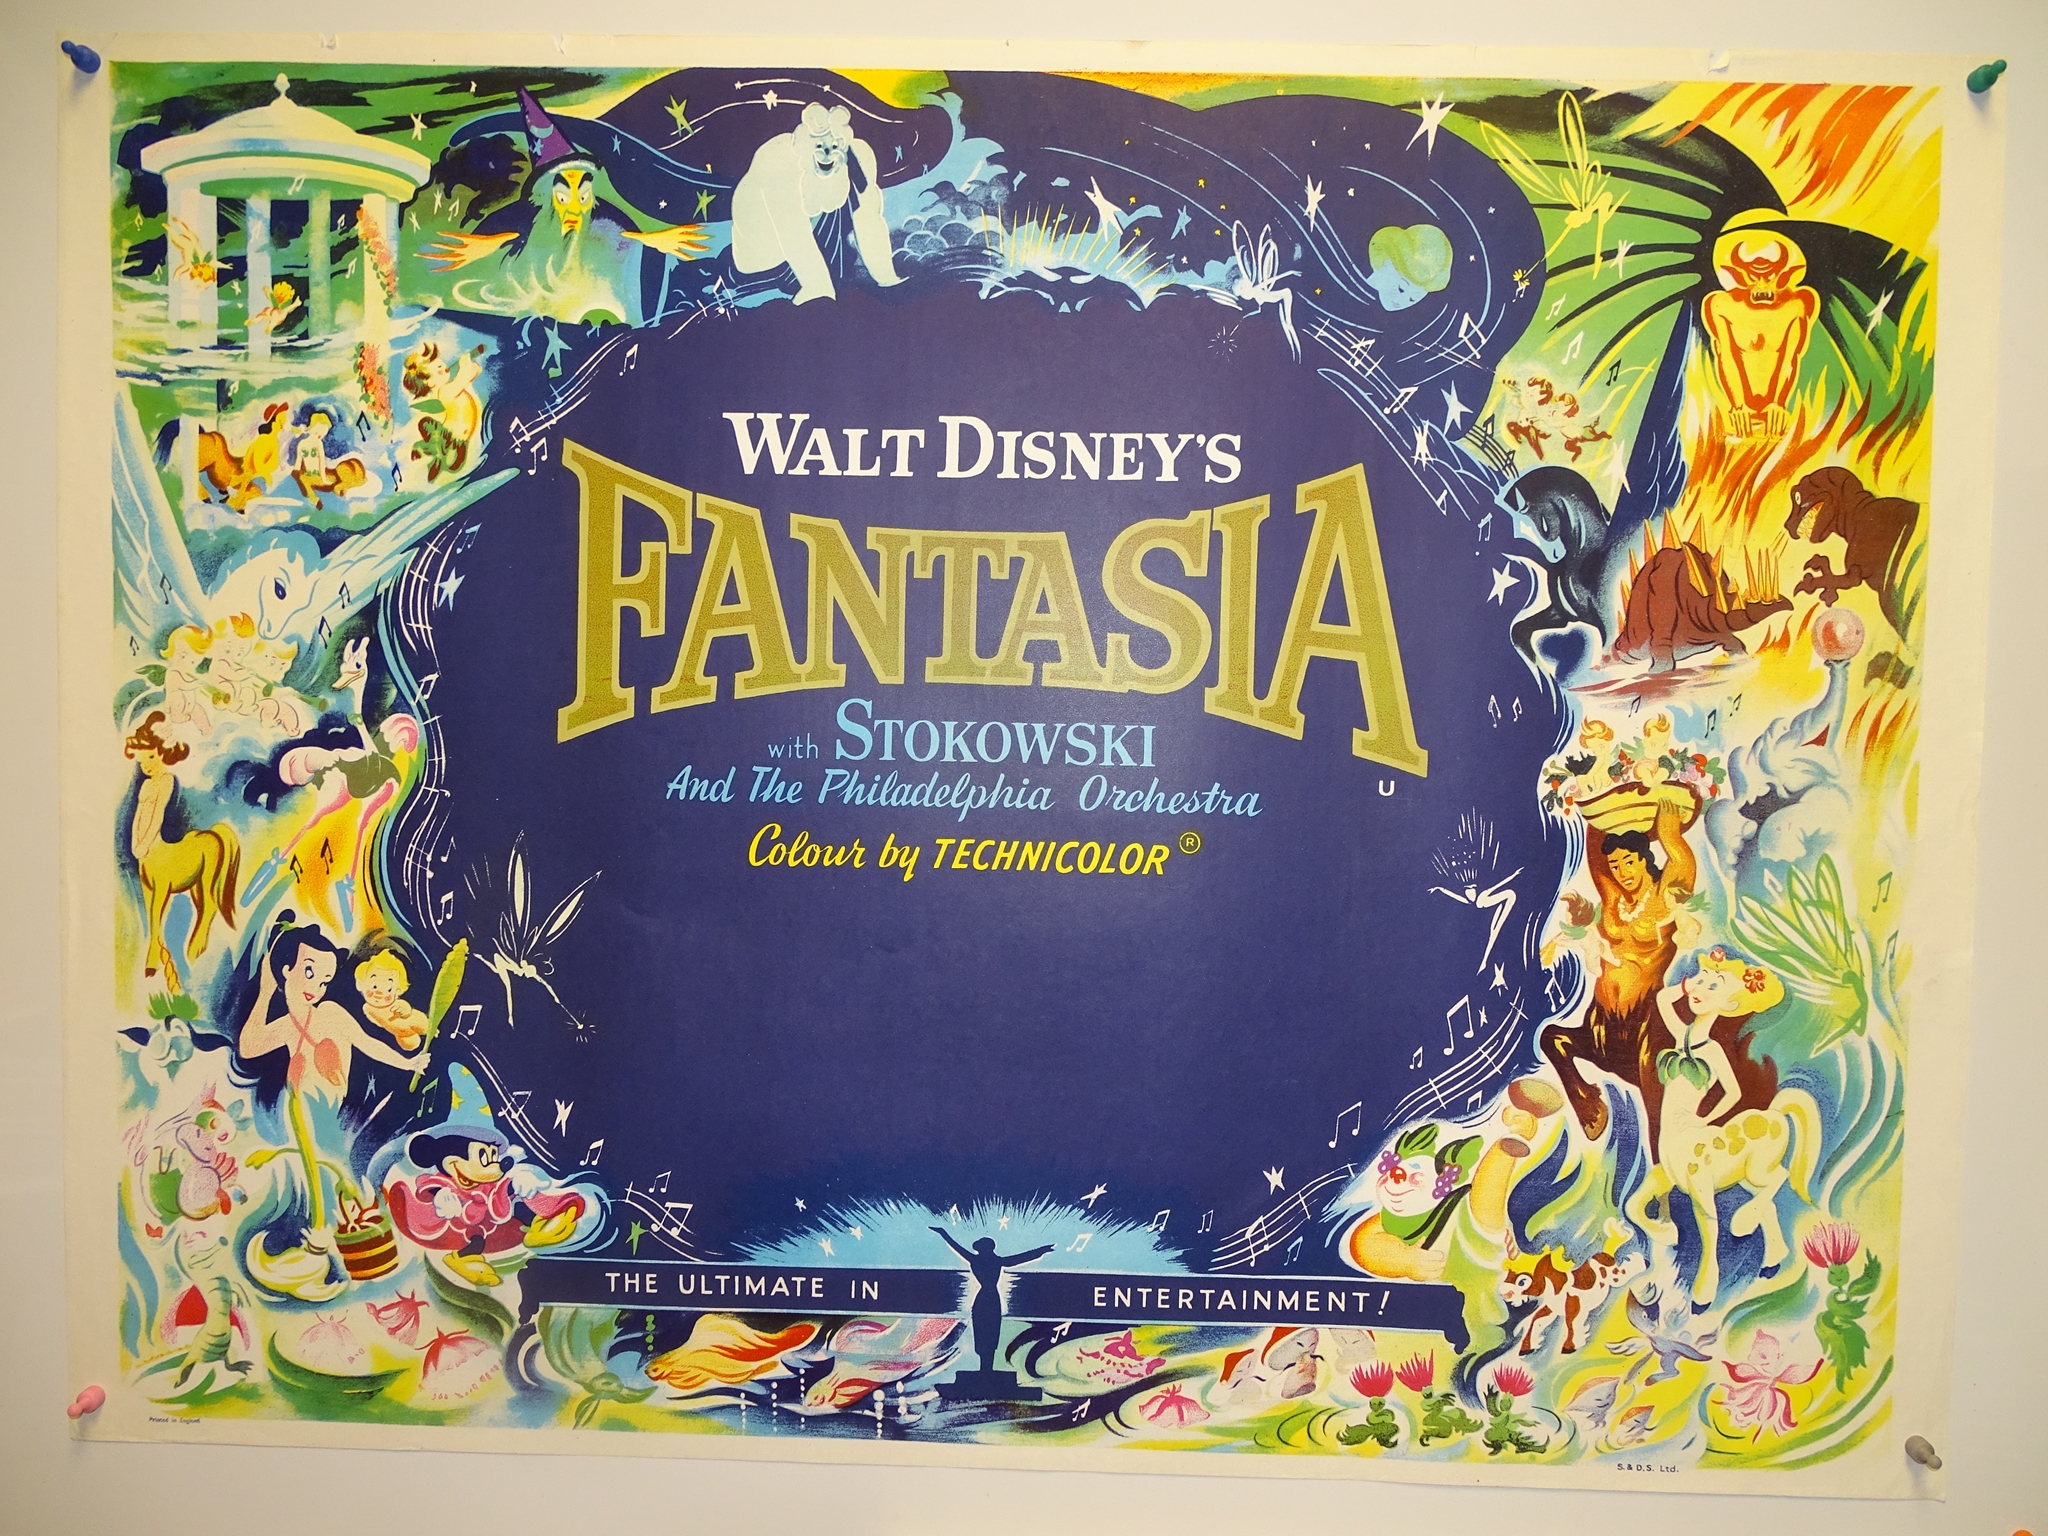 FANTASIA (1968 Release) - UK Quad Film Poster - 30" x 40" (76 x 101.5 cm) - Rolled, Very Good